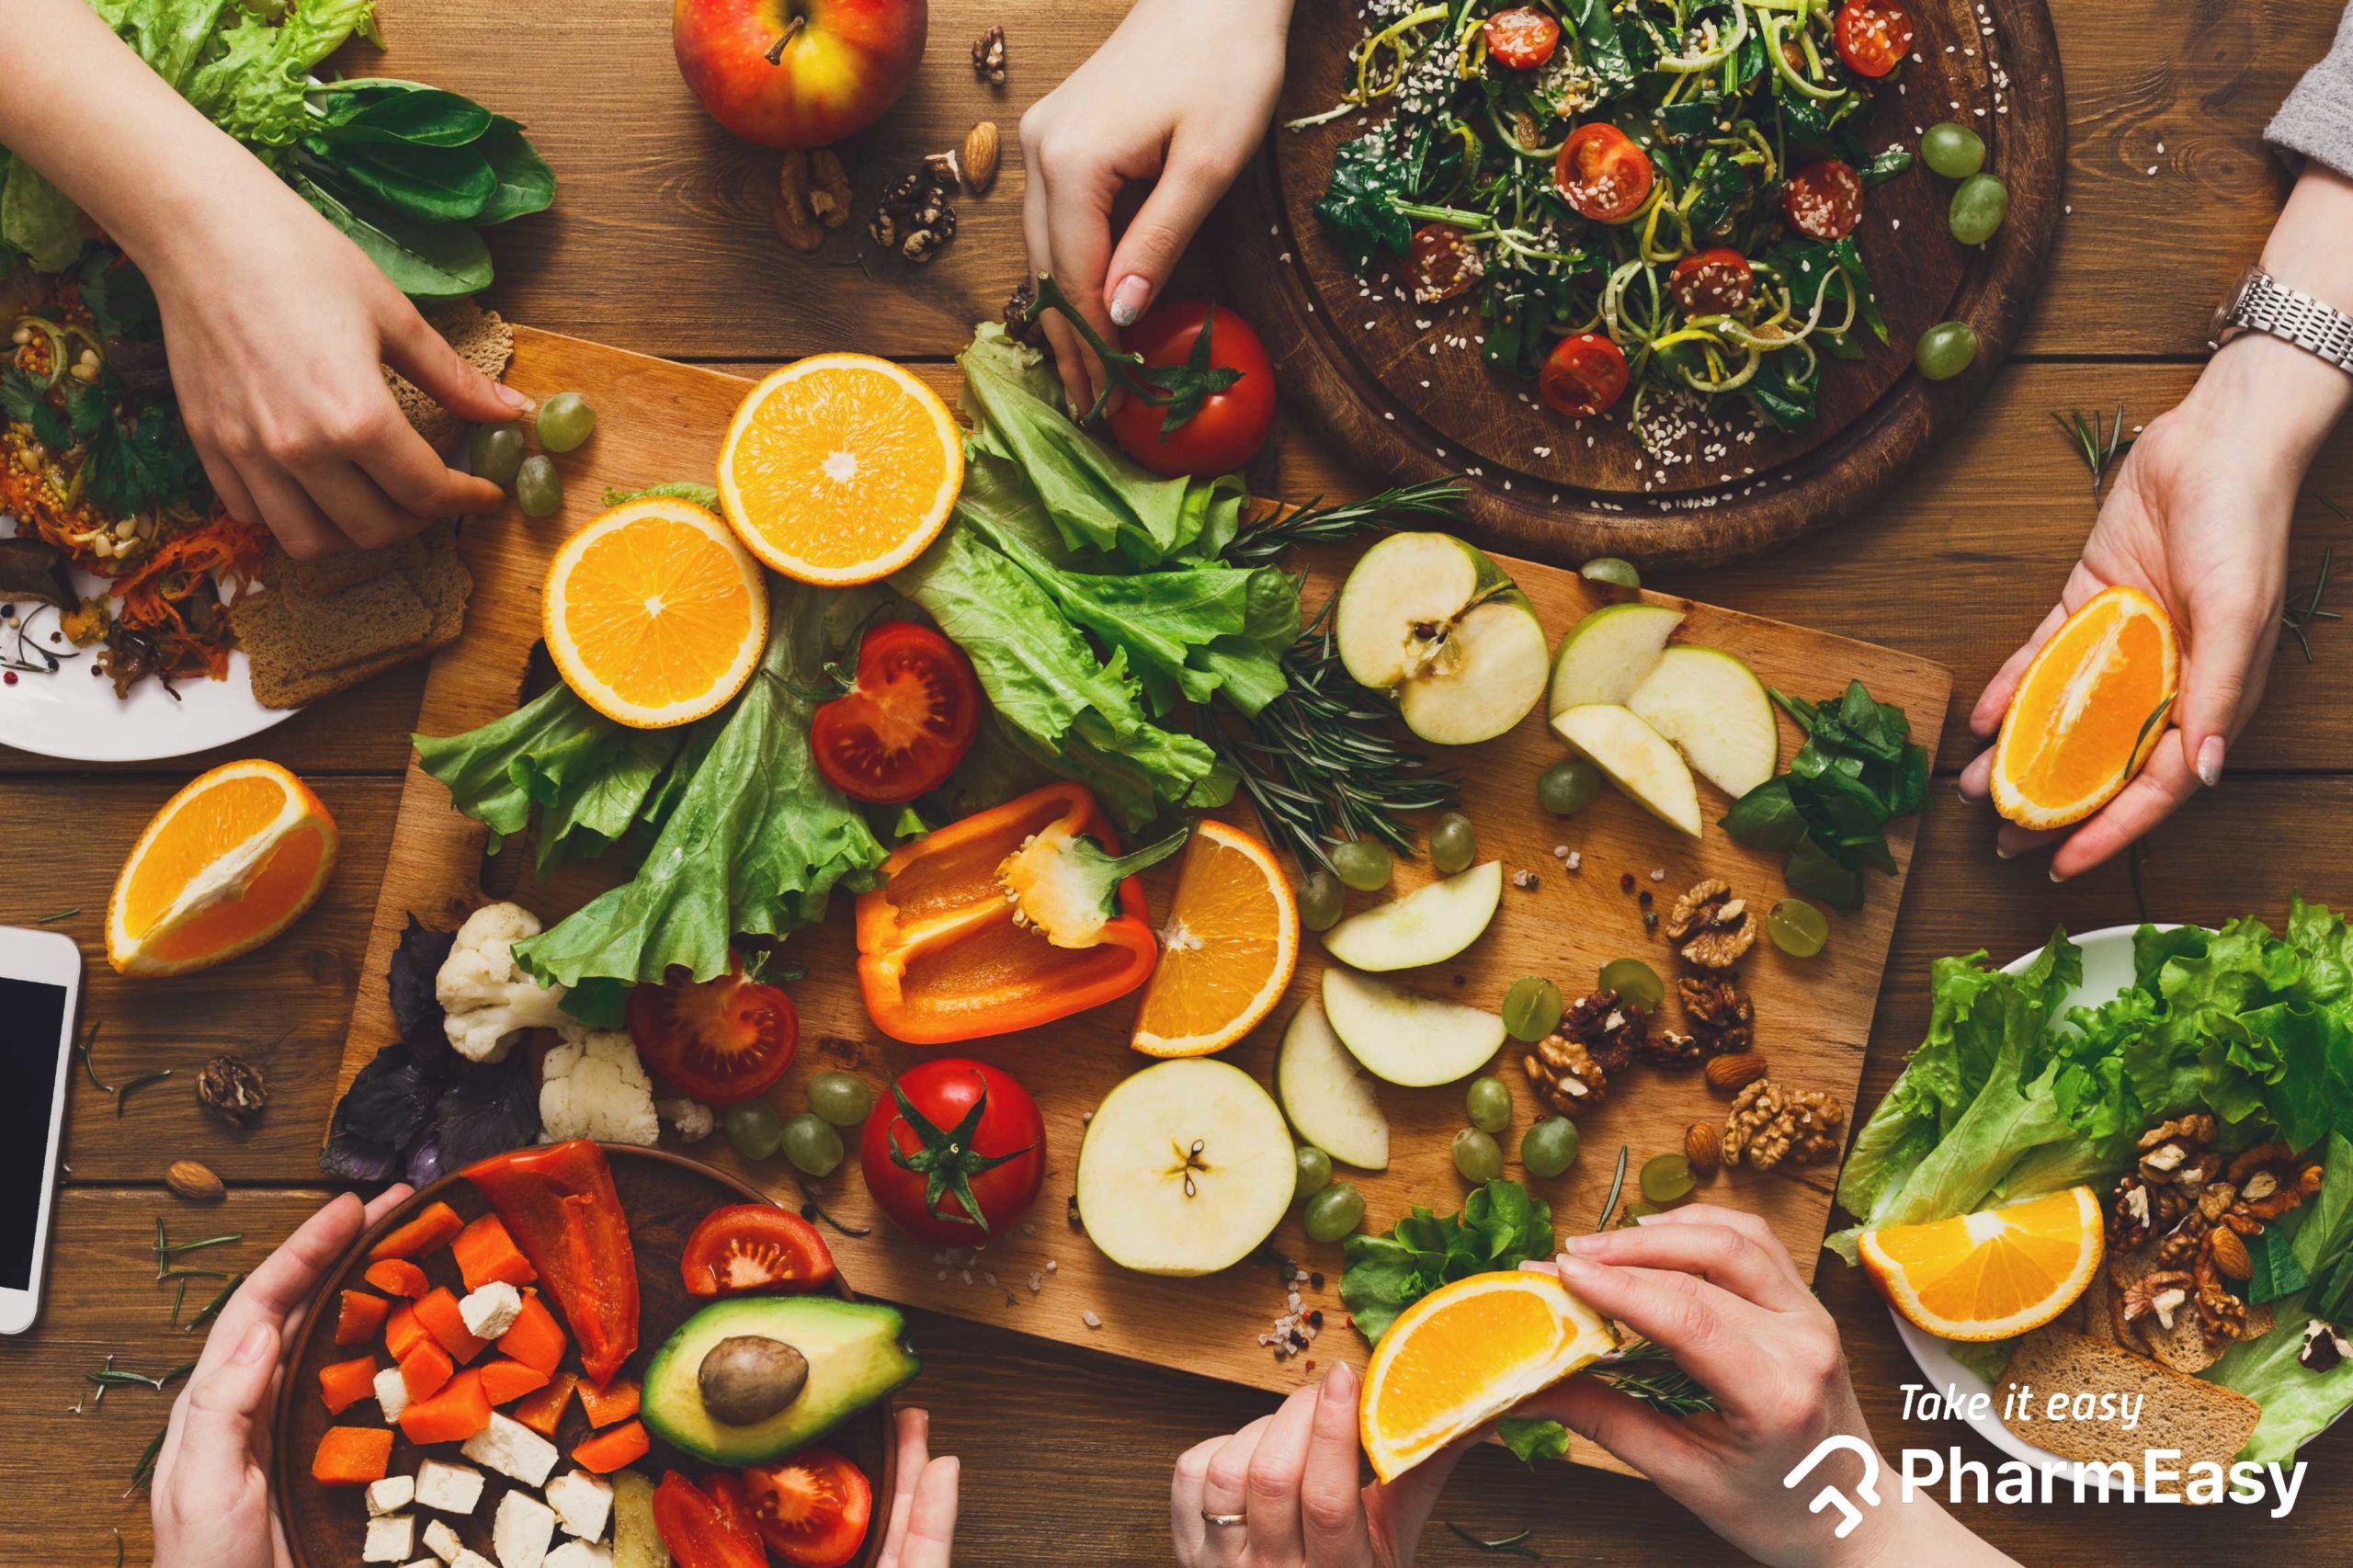 Types Of Vegetarian Diets And Their Benefits - PharmEasy Blog